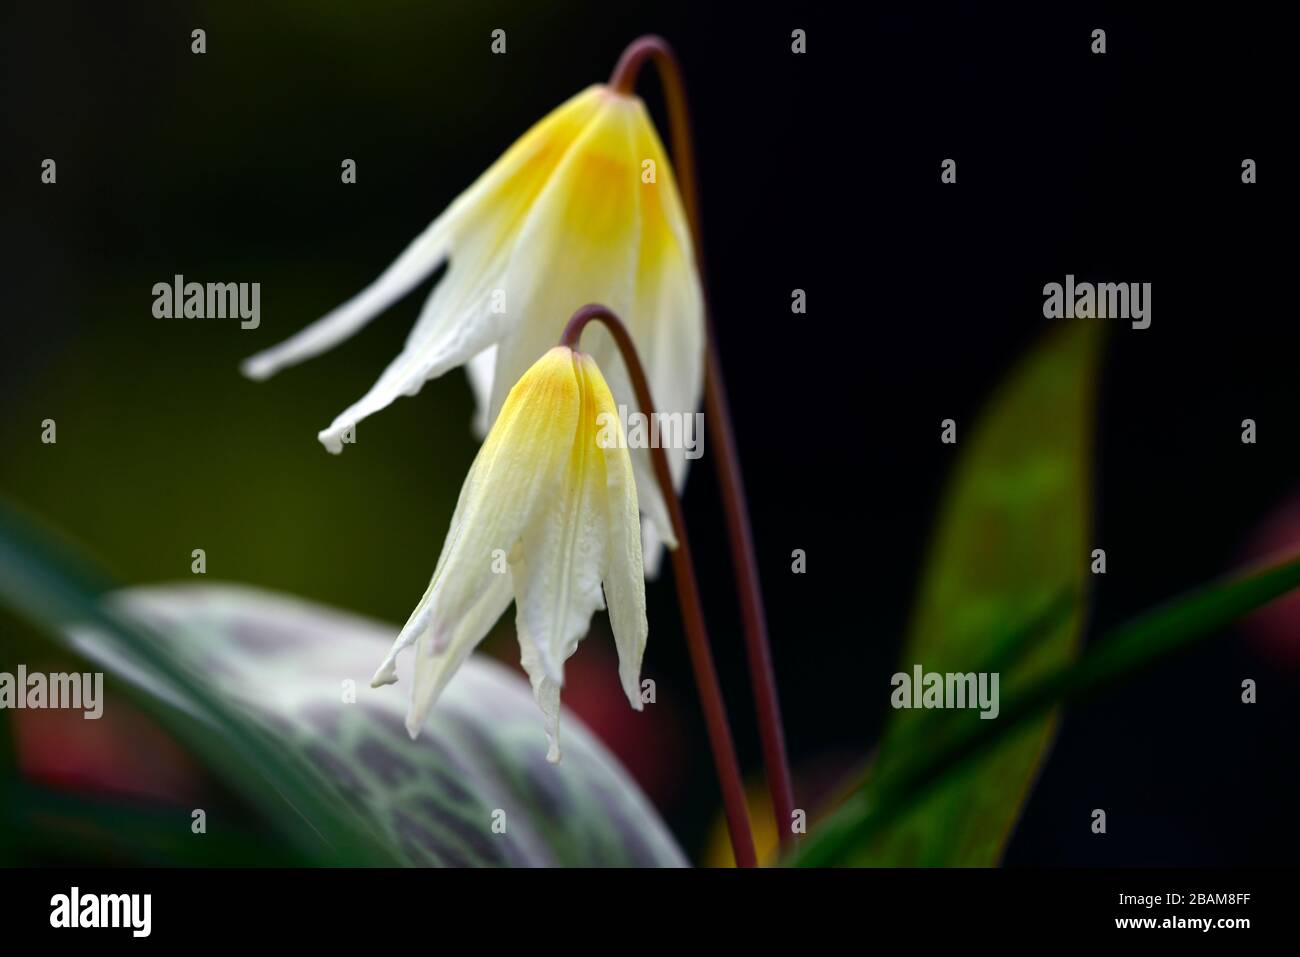 Erythronium multiscapideum, white cream yellow flushed flowers,flower,flowering dog's tooth violet,spring,flowers,flower,flowering,mottled foliage,RM Stock Photo